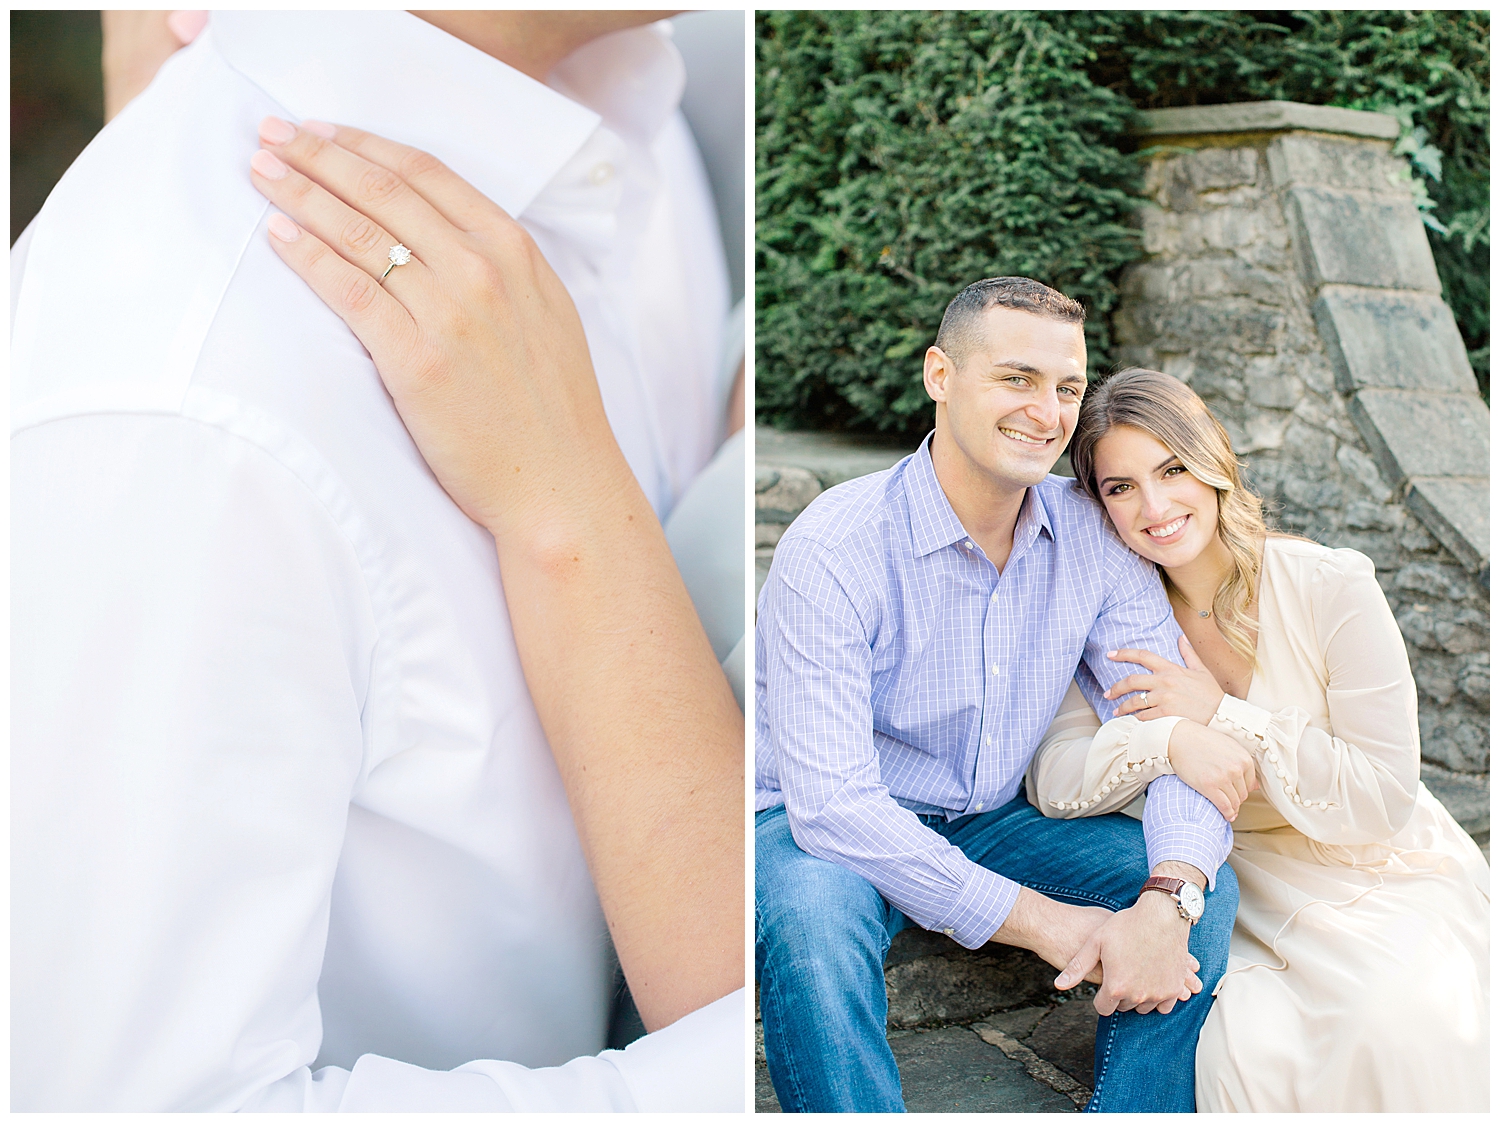 Jakab_Kingwood_Center_Gardens_Estate_Mansfield_Ohio_Engagement_Photography_Session_Kate_Mannella